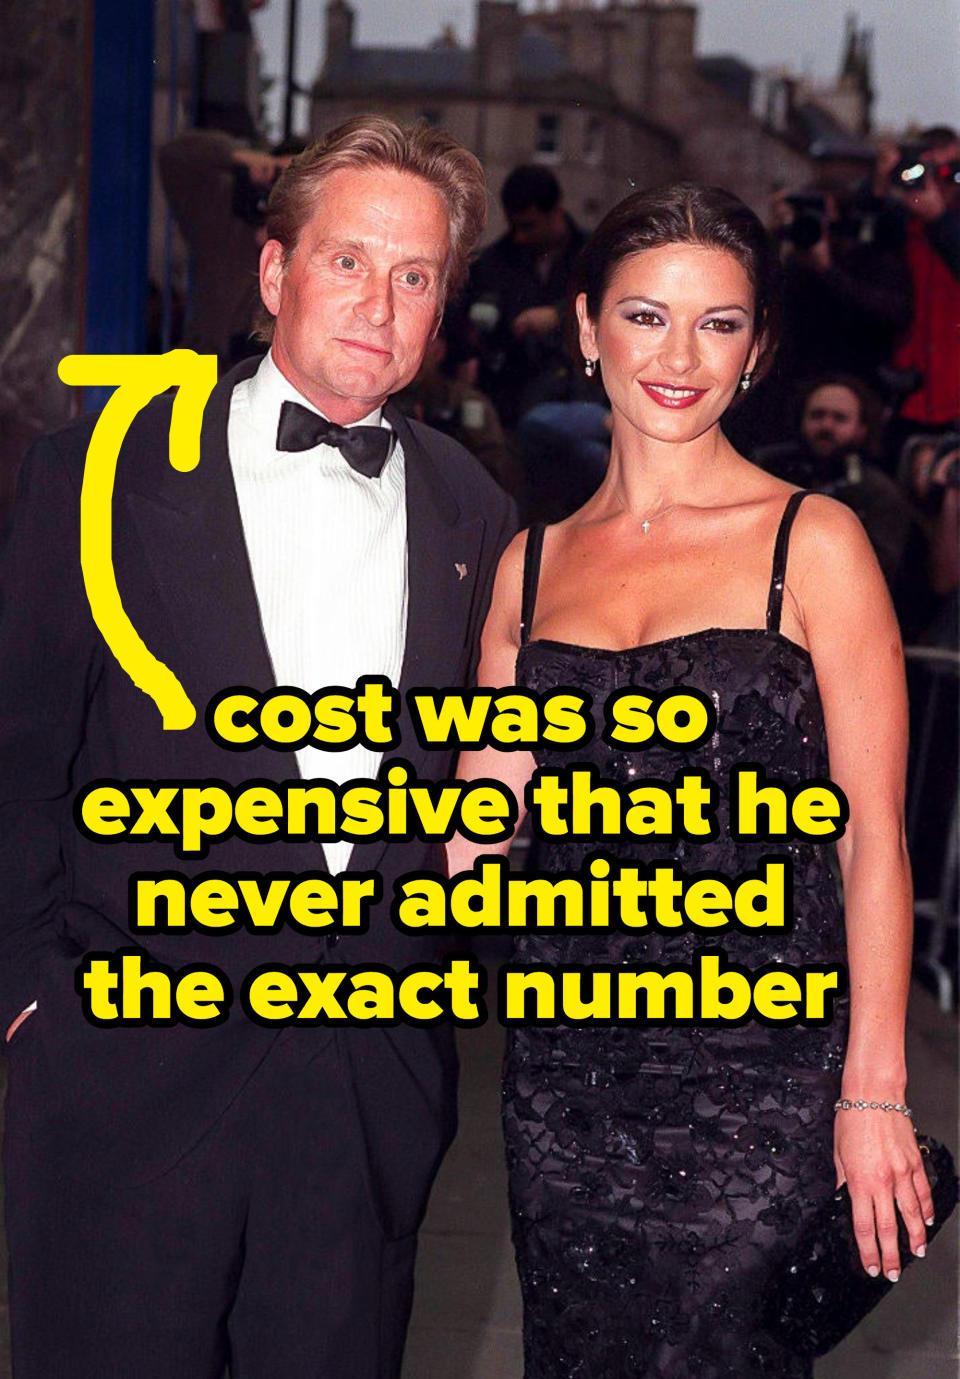 Michael Douglas and Catherine Zeta-Jones at an event with text pointing at Douglas that reads, "Cost was so expensive, he never admitted the exact number"